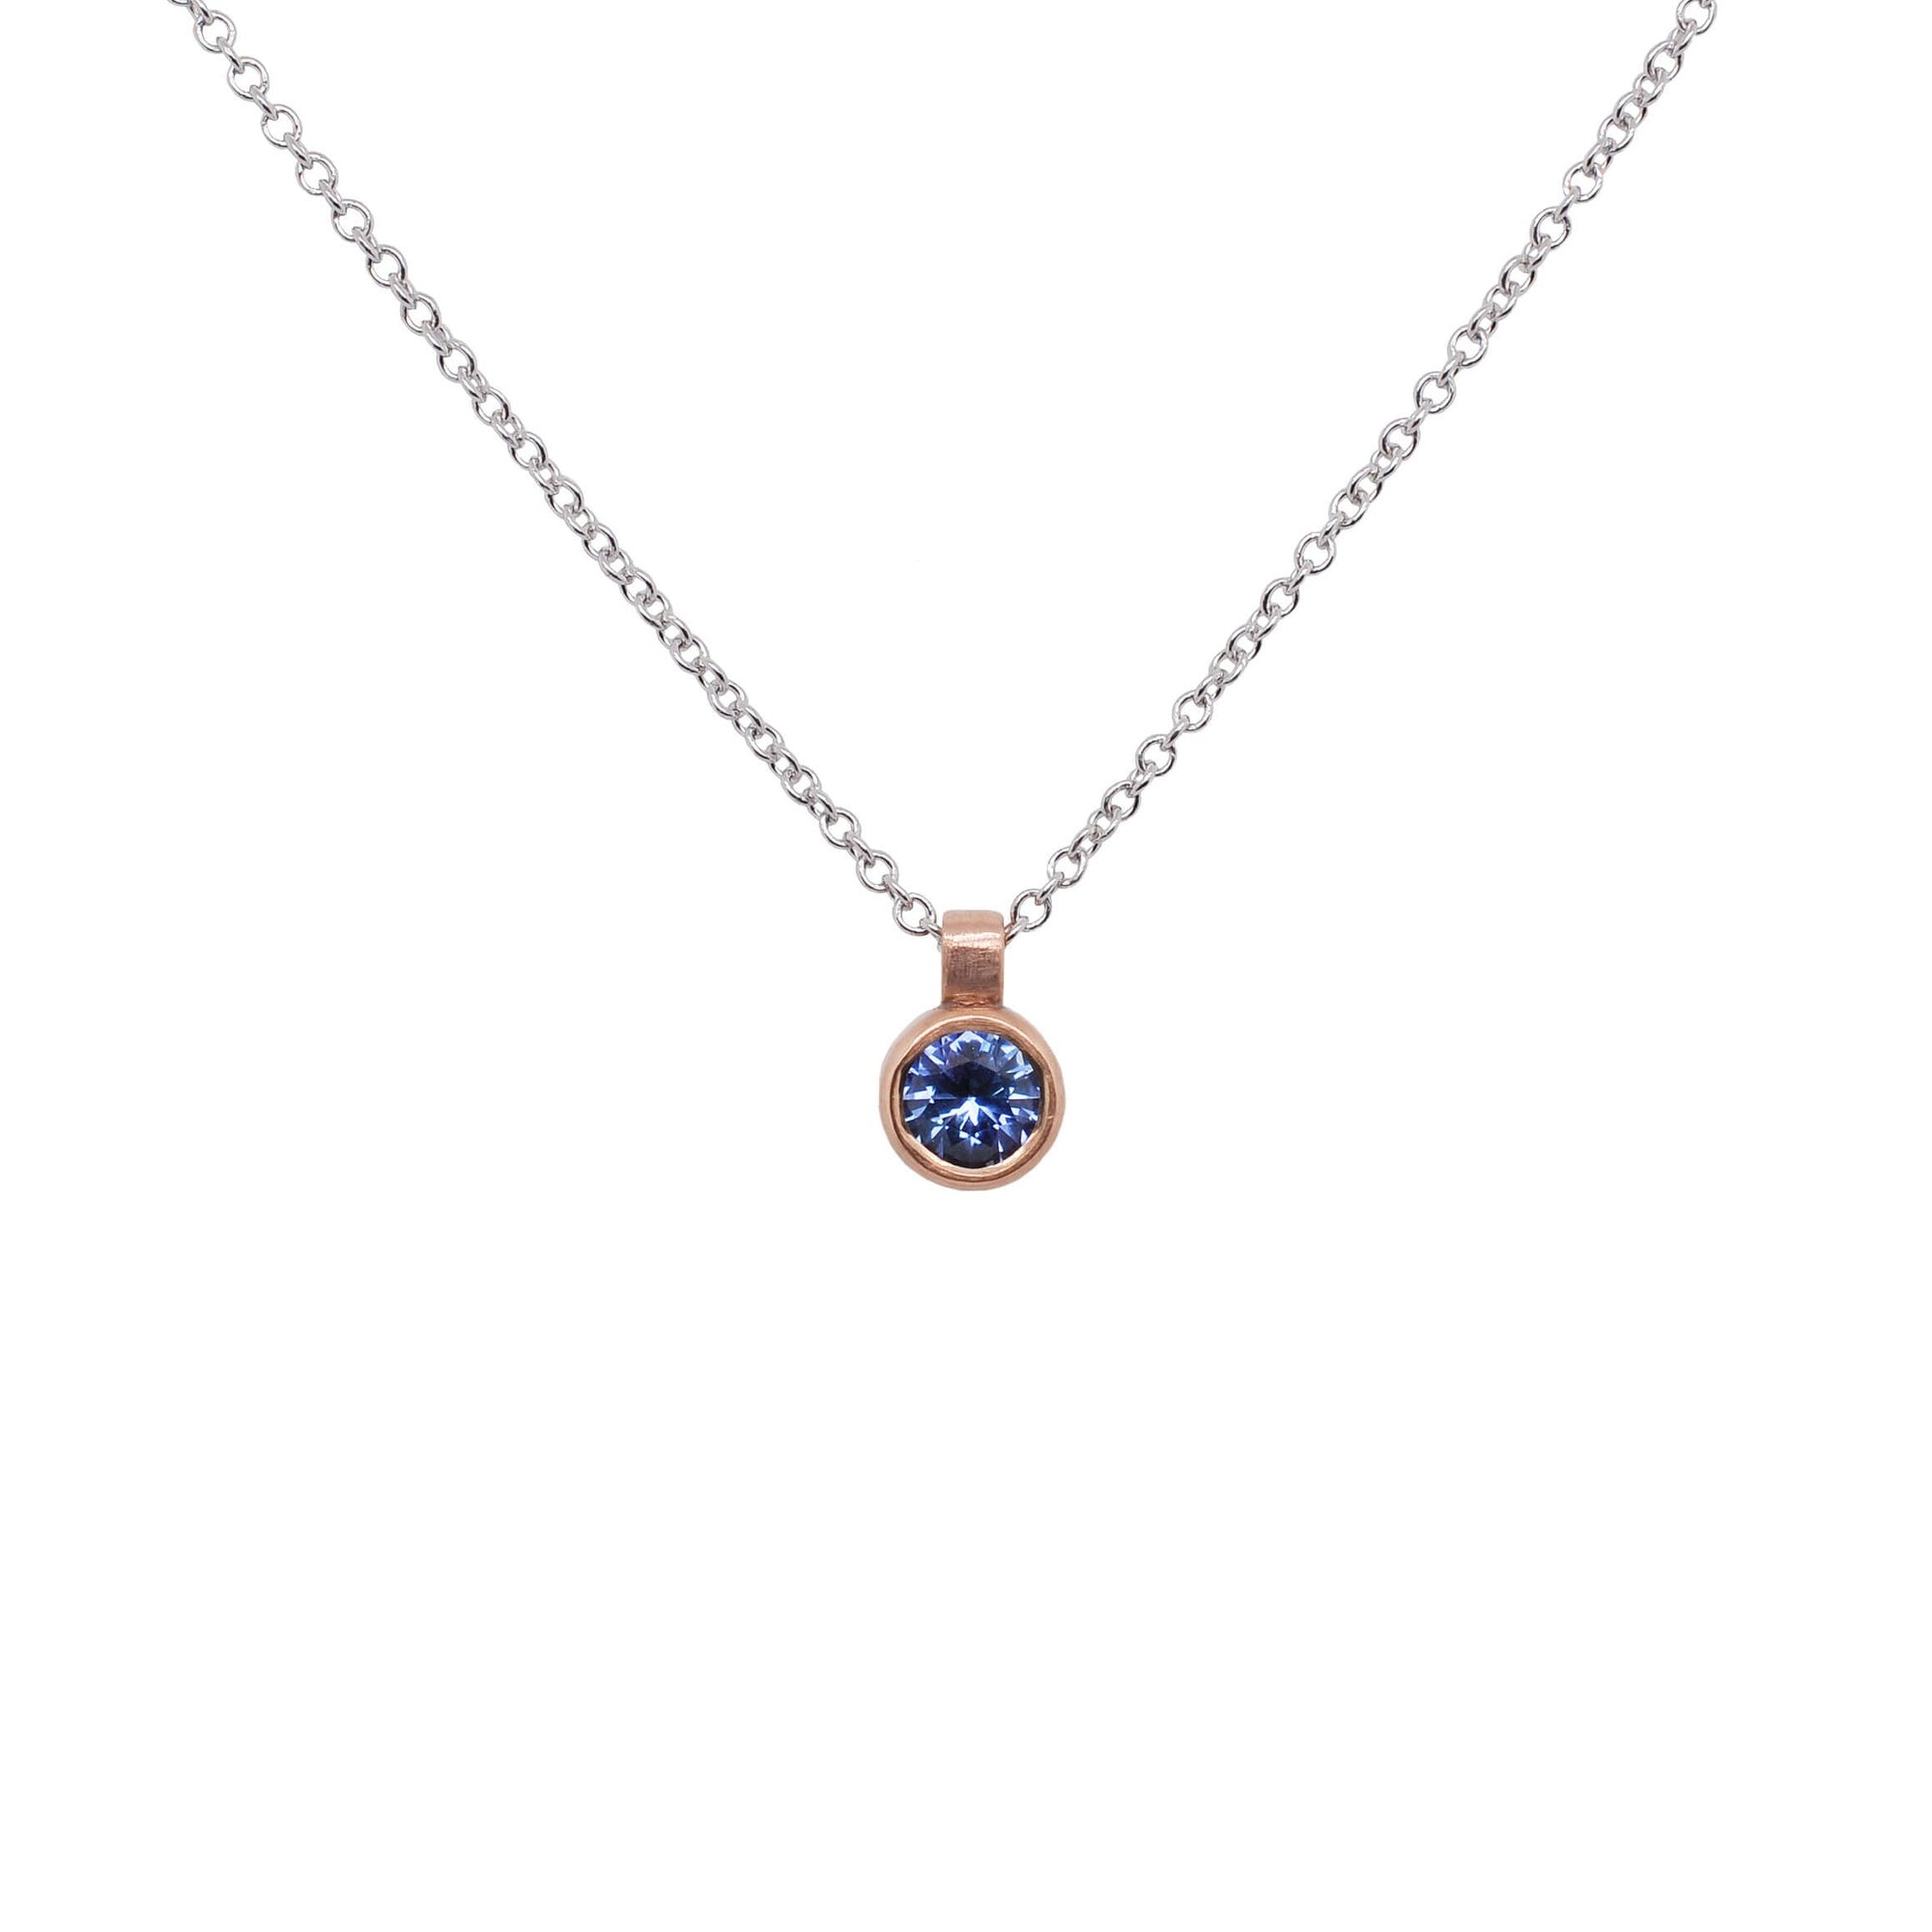 Ceylon blue sapphire and rose gold pendant. Handmade by EC Design Jewelry in Minneapolis, MN using recycled metal and conflict-free stone.